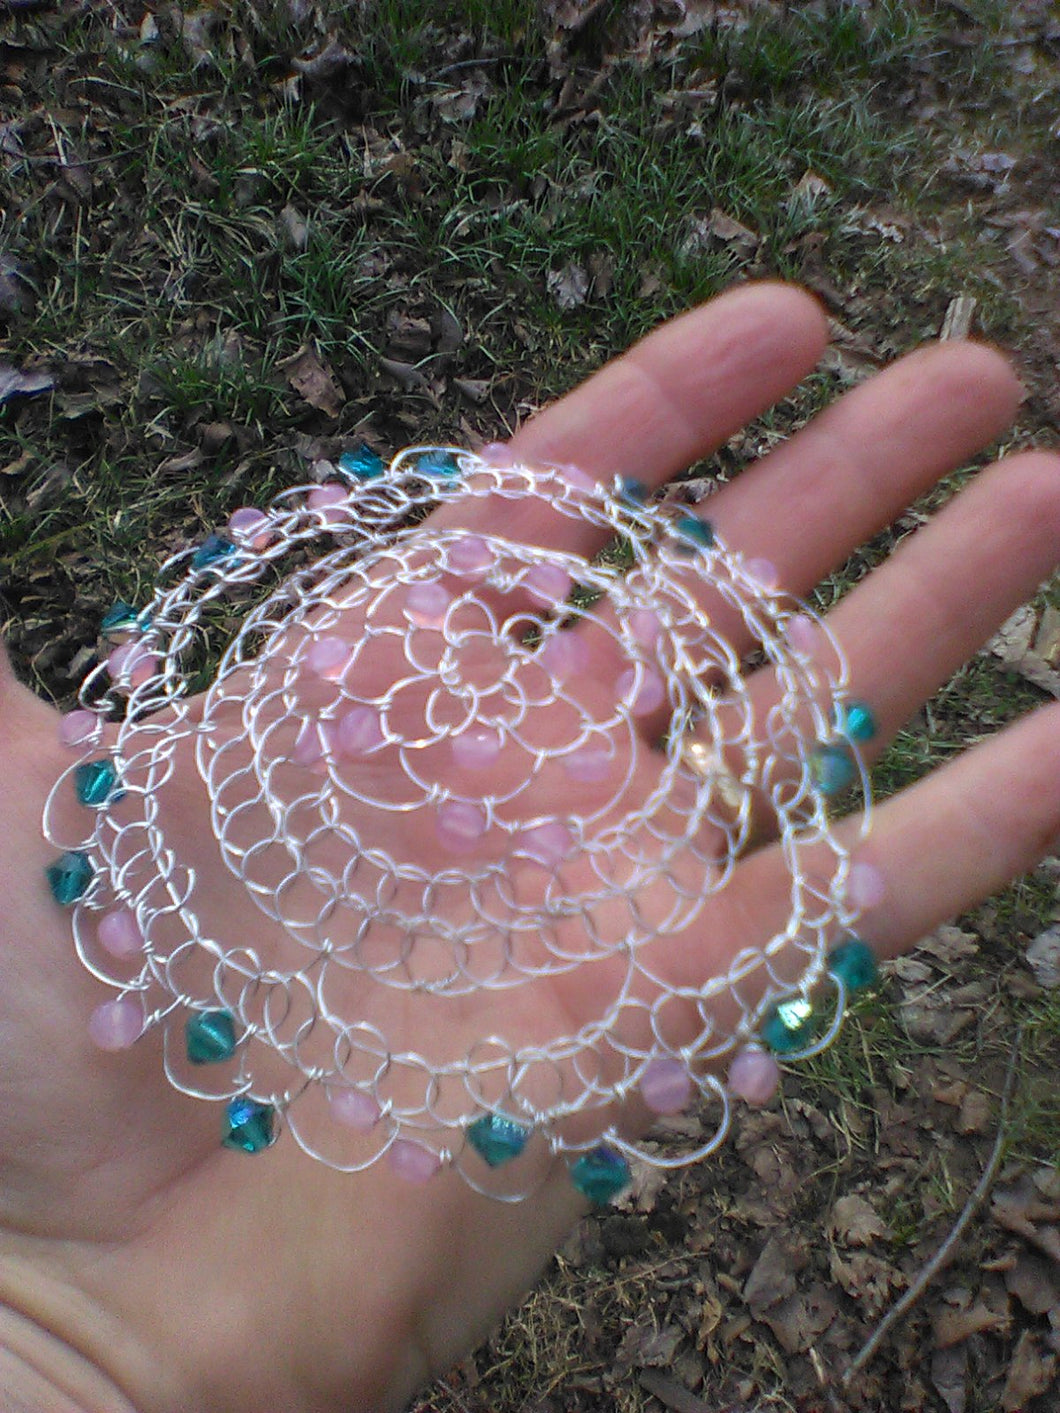 Teal and pink beaded silver wire kippah. The kippah is on a hand to show the size.